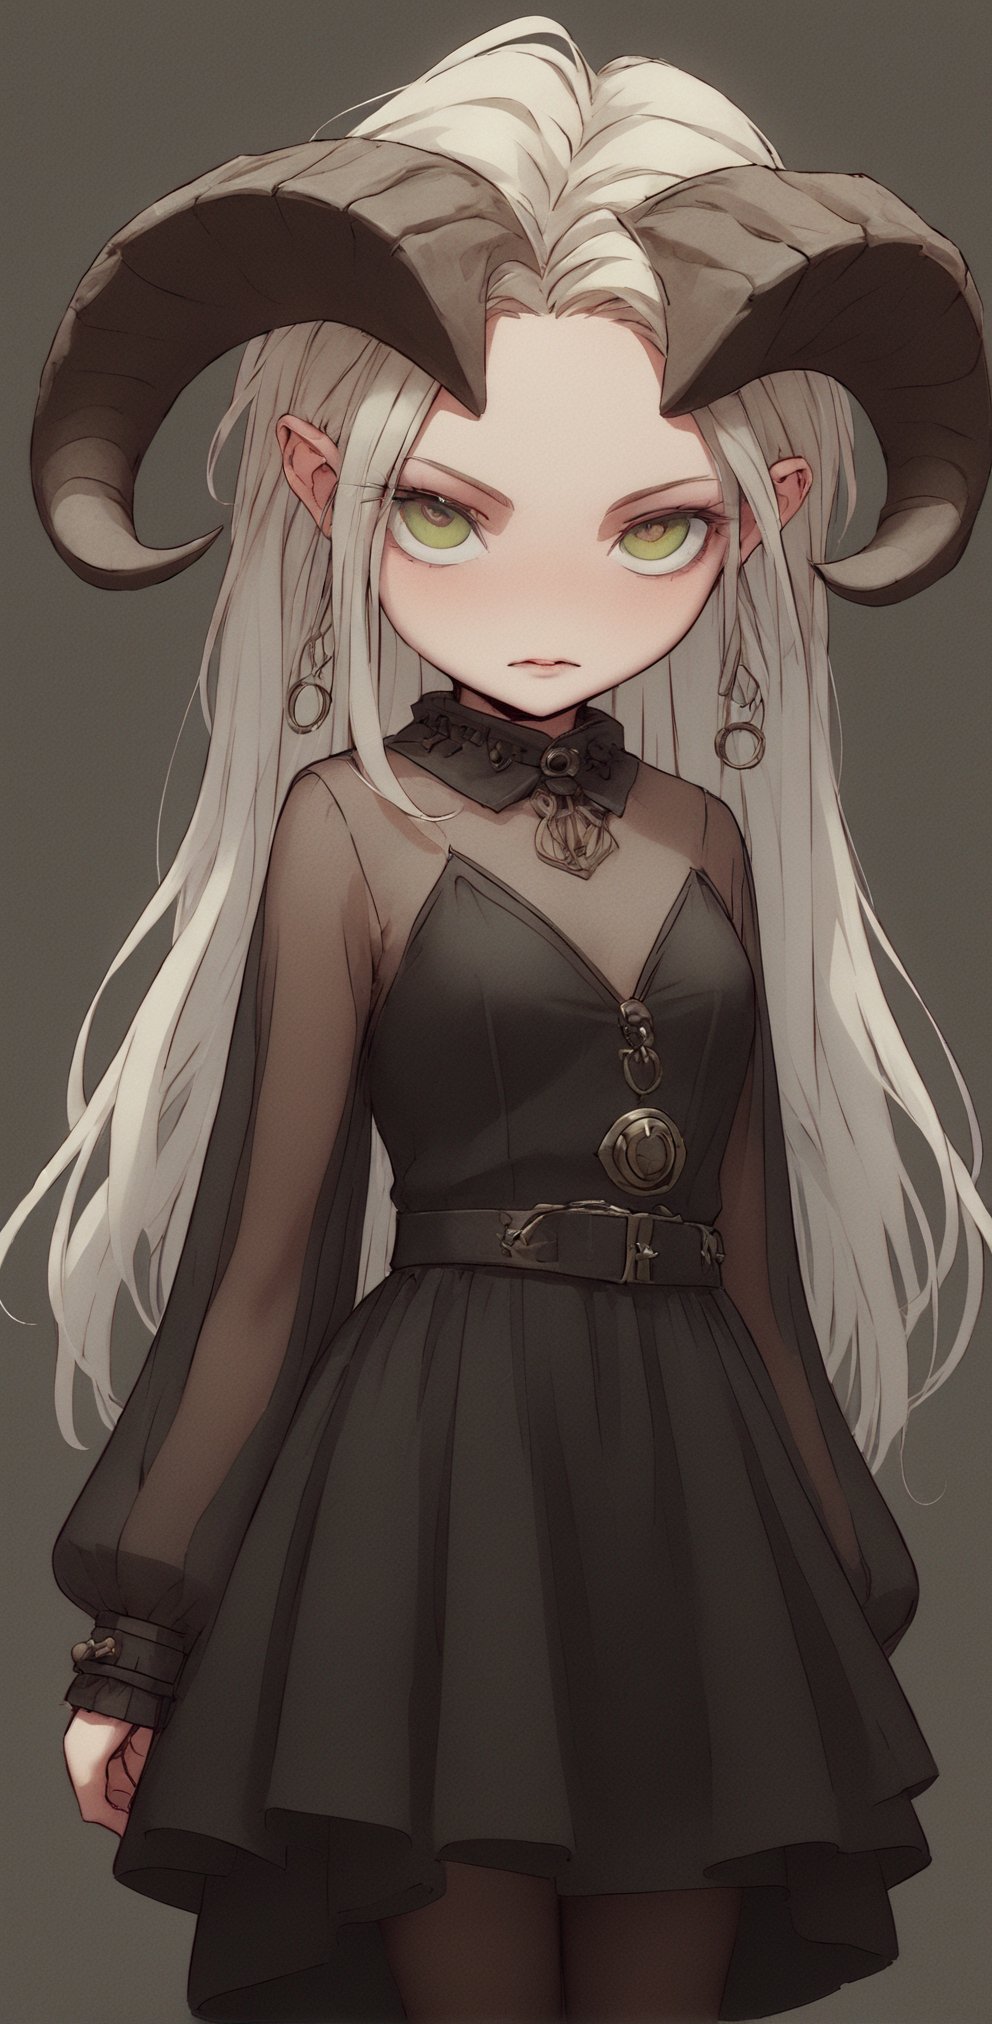 1 girl, (masterful), albino demon girl with lethargic sleepy smokey eyes,(white dreadlocks hair),slit pupil eyes,mesh fishnet blouse, (long intricate horns:1.2) ,
best quality, highest quality, extremely detailed CG unity 8k wallpaper, detailed and intricate, 
,steampunk style,Glass Elements